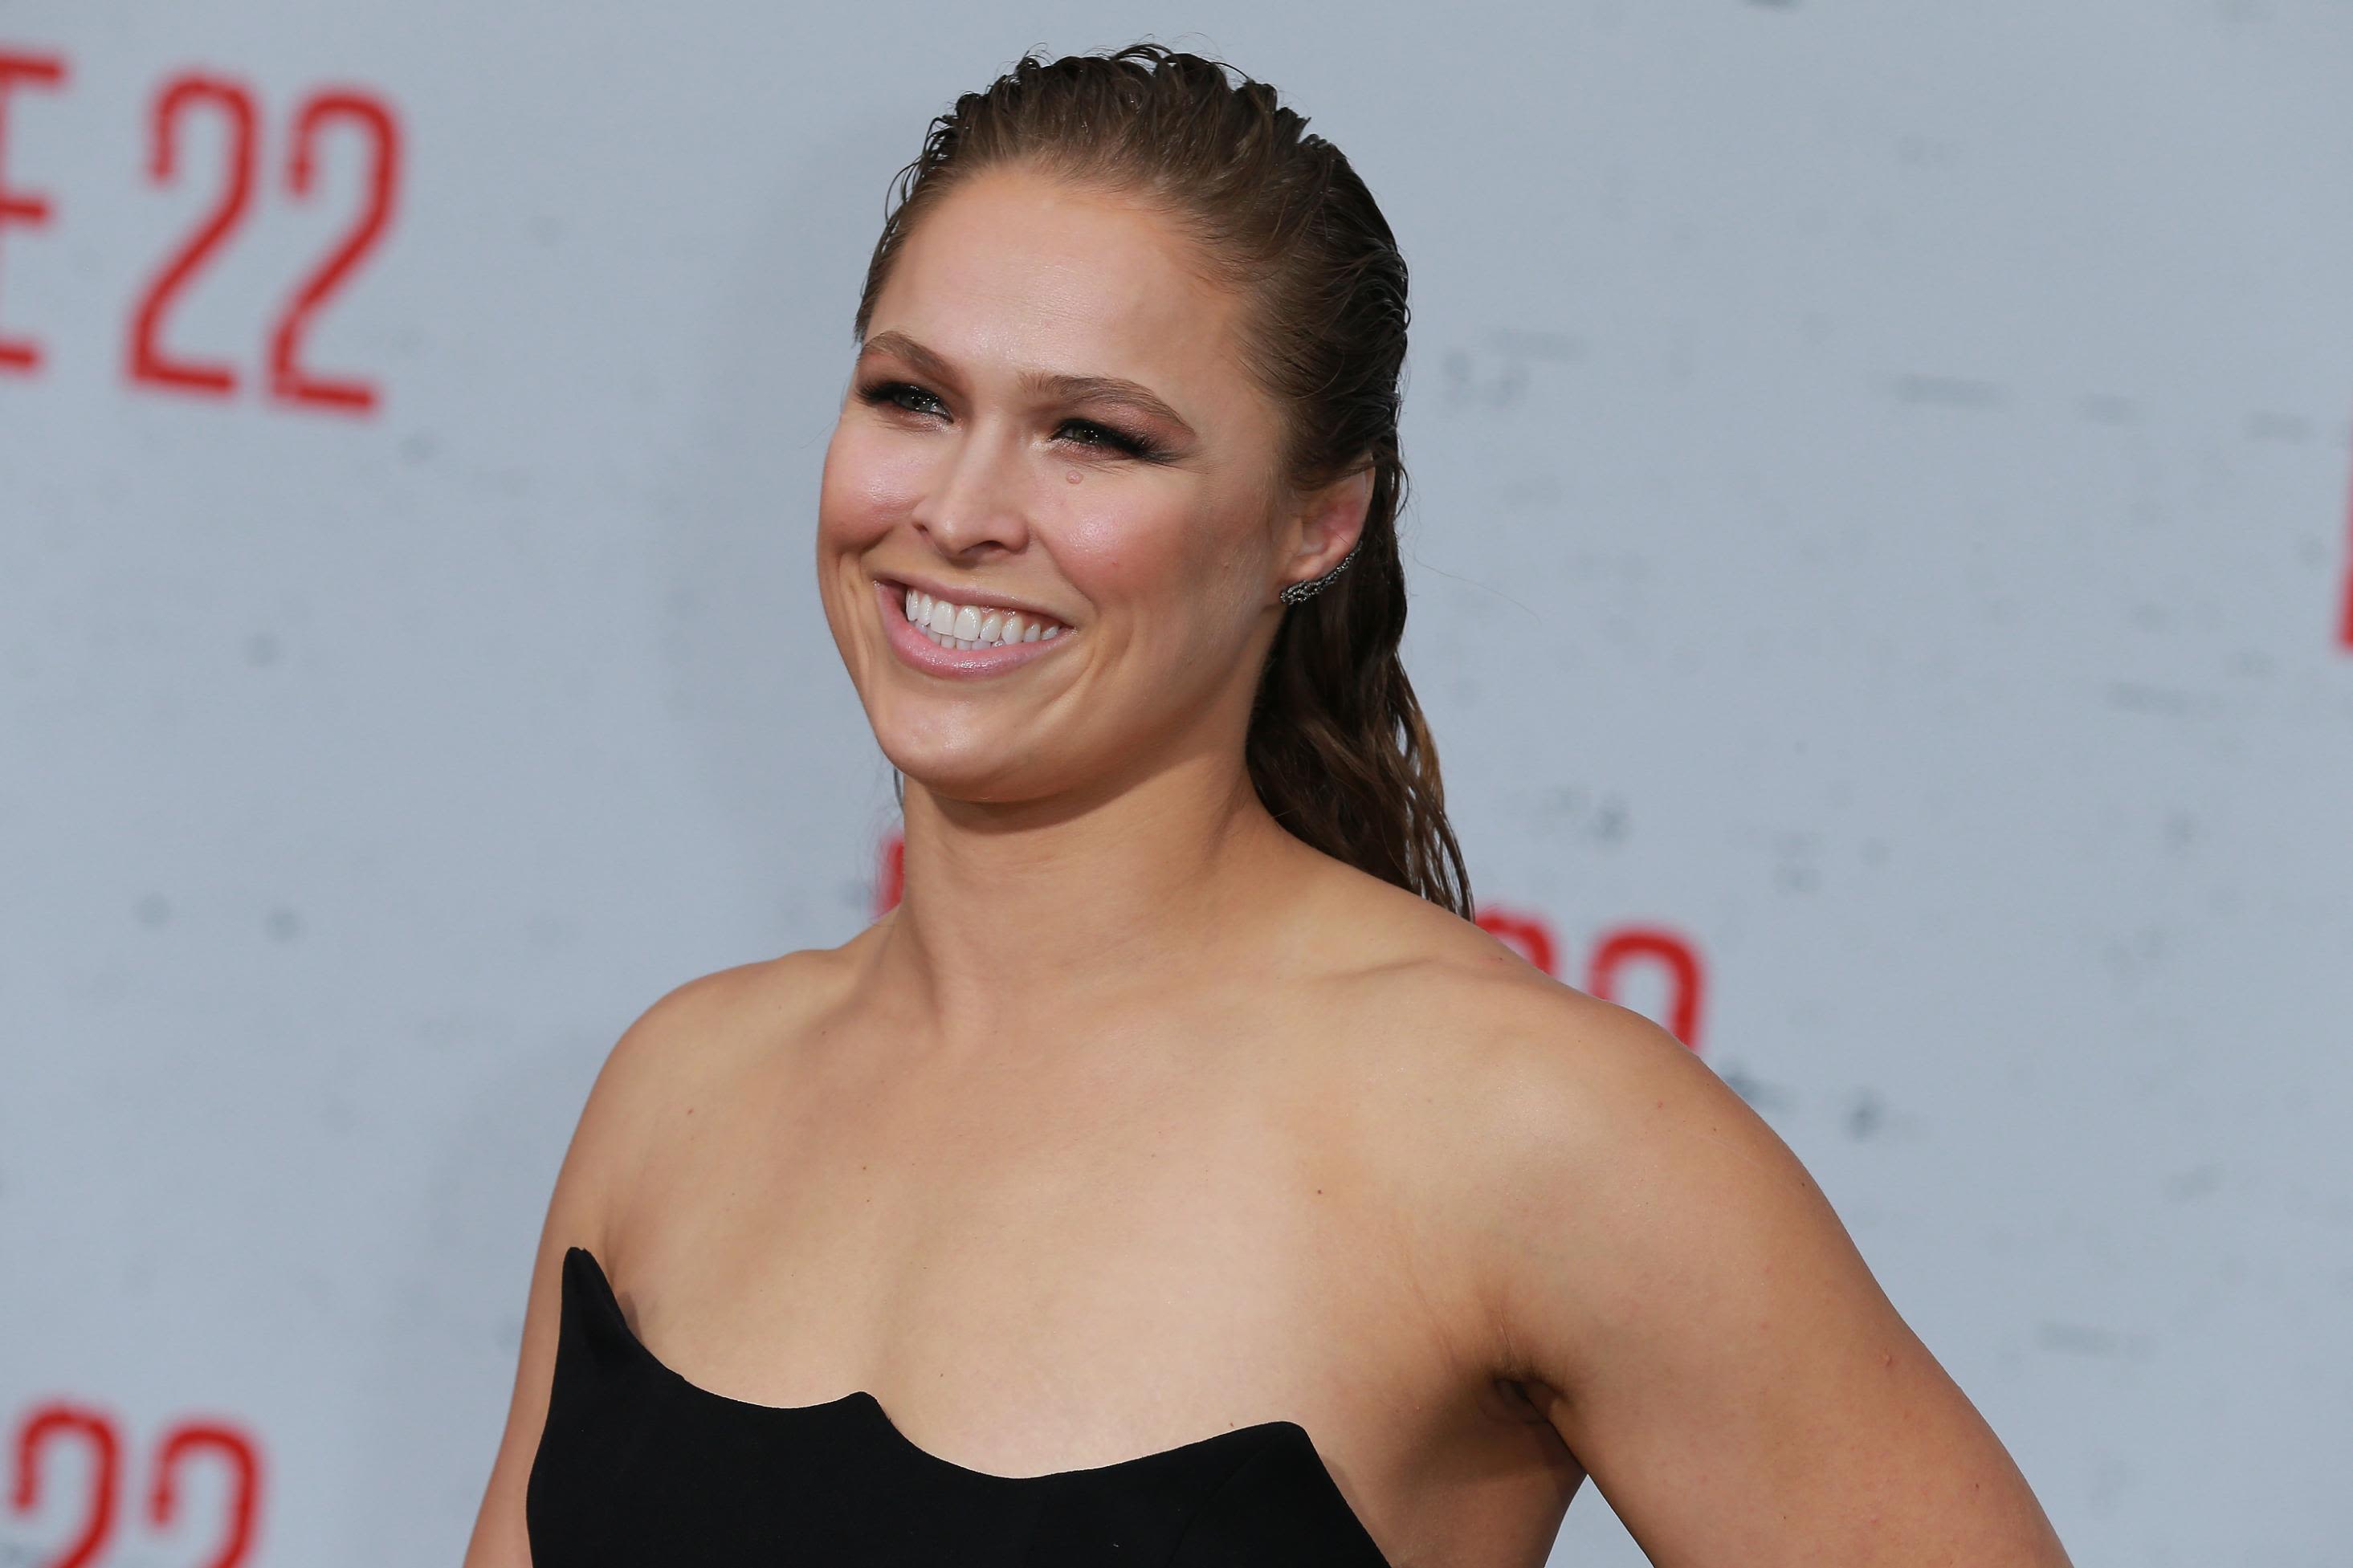 14 Facts About Ronda Rousey